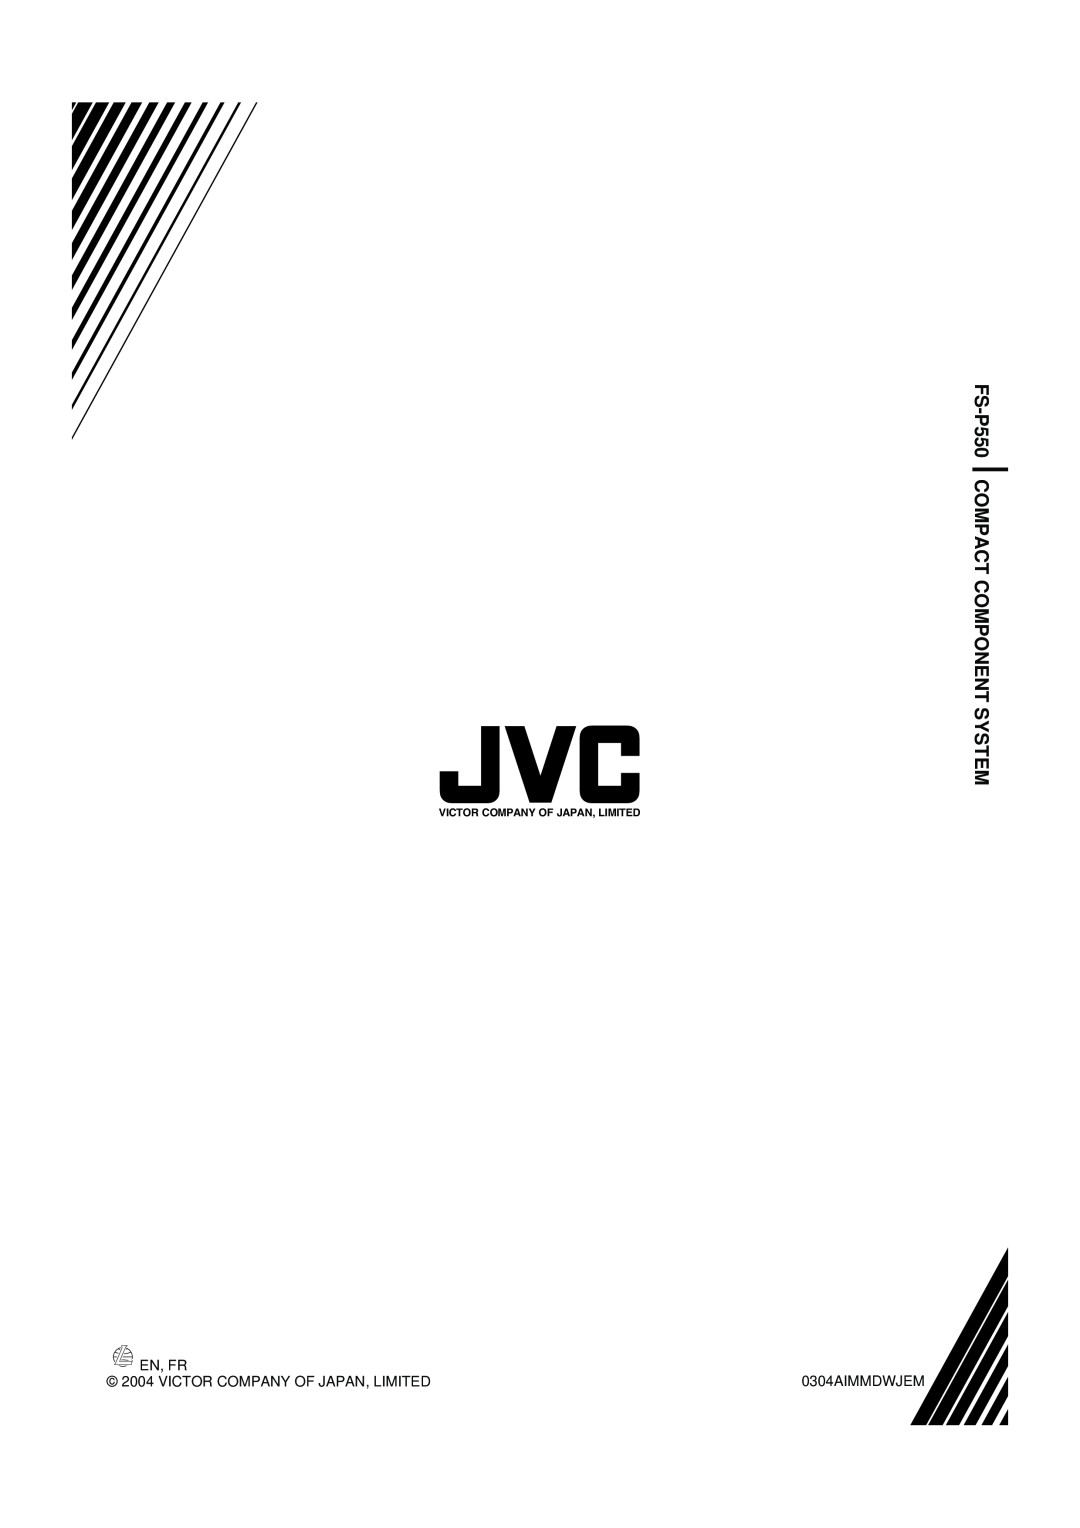 JVC manual FS-P550COMPACT COMPONENT SYSTEM, En, Fr, 0304AIMMDWJEM, Victor Company Of Japan, Limited 